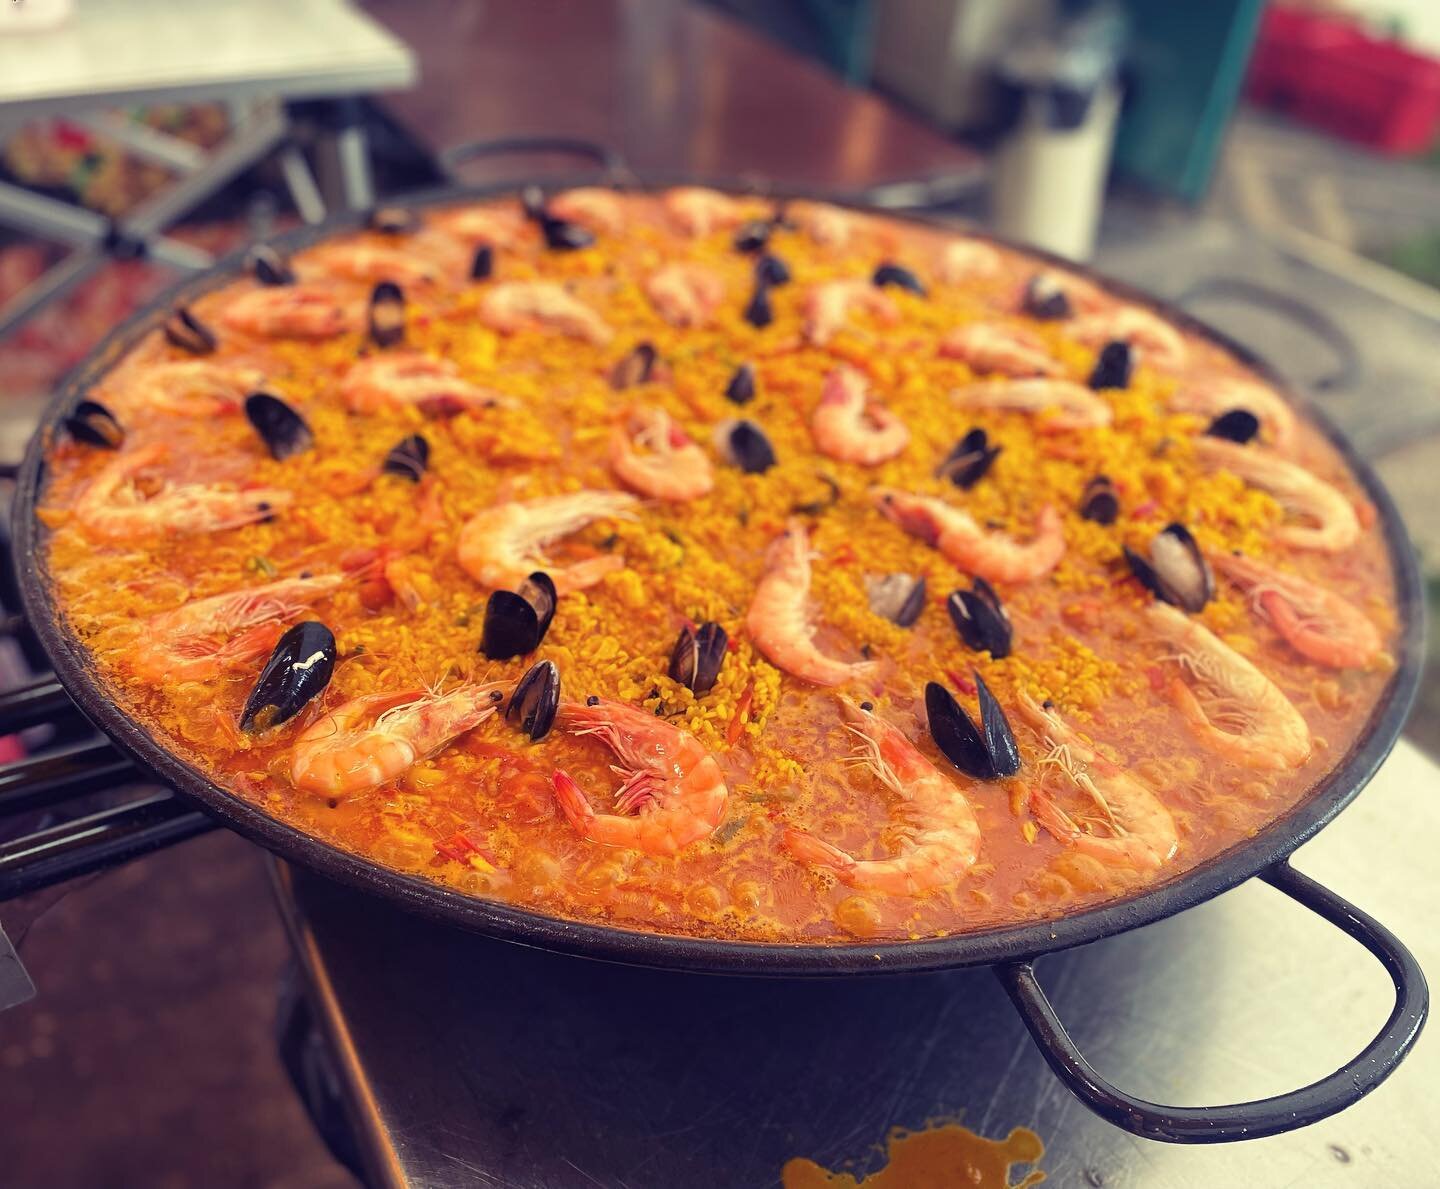 Our Sunday Seafood Paella is very #seafoodie &amp; crammed with culinary goodness to feed stomachs &amp; souls
.
.
.

#paella #food #foodporn #a #instafood #foodie #paellalovers #arroz #tapas #ola #spanishfood #seafood #spain #foodphotography #foodlo